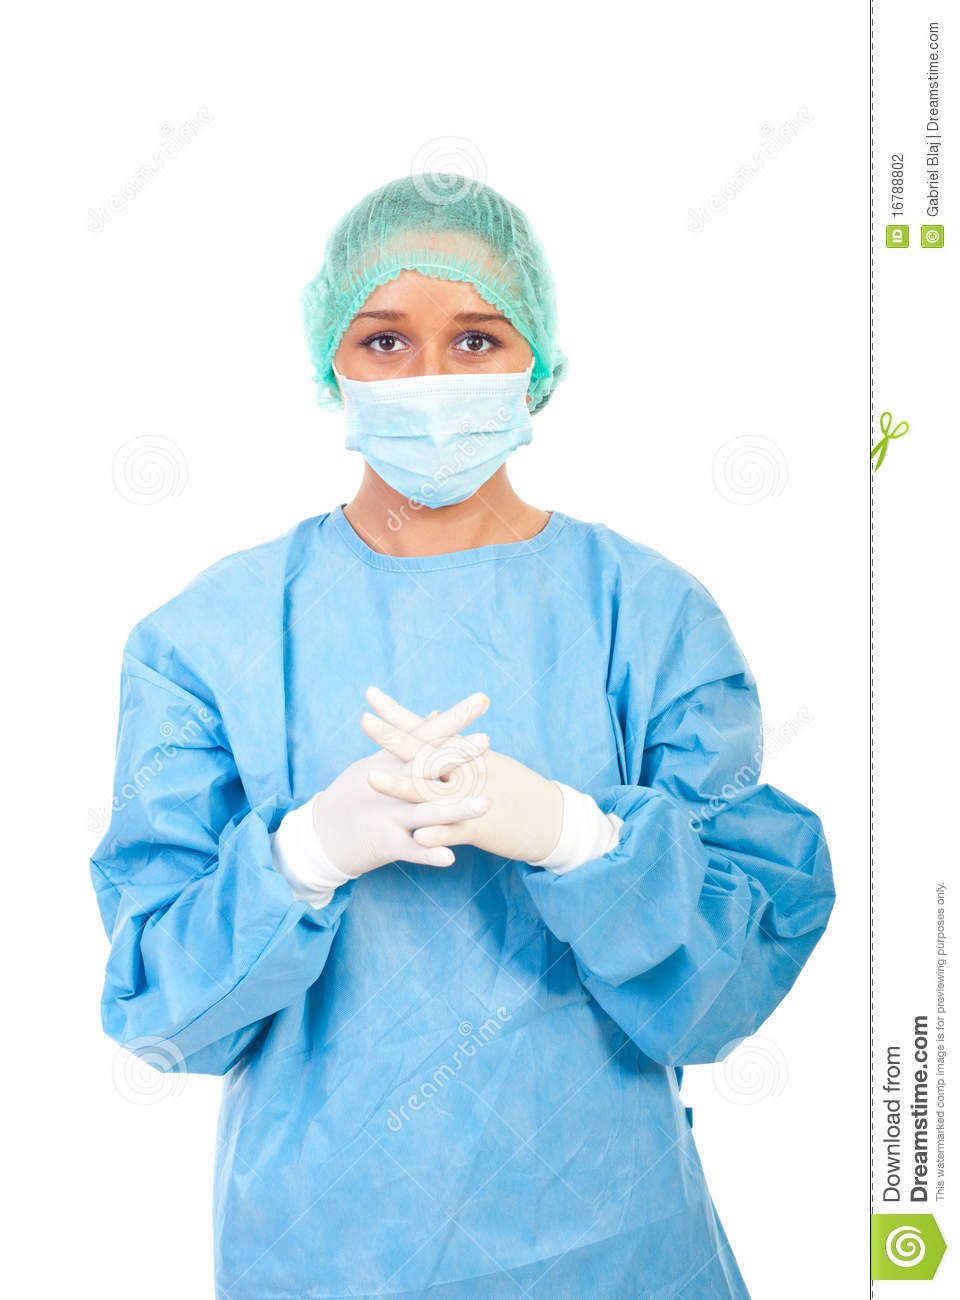 Surgeon Woman Dressed In Sterile Uniform Cap And Protective Gloves